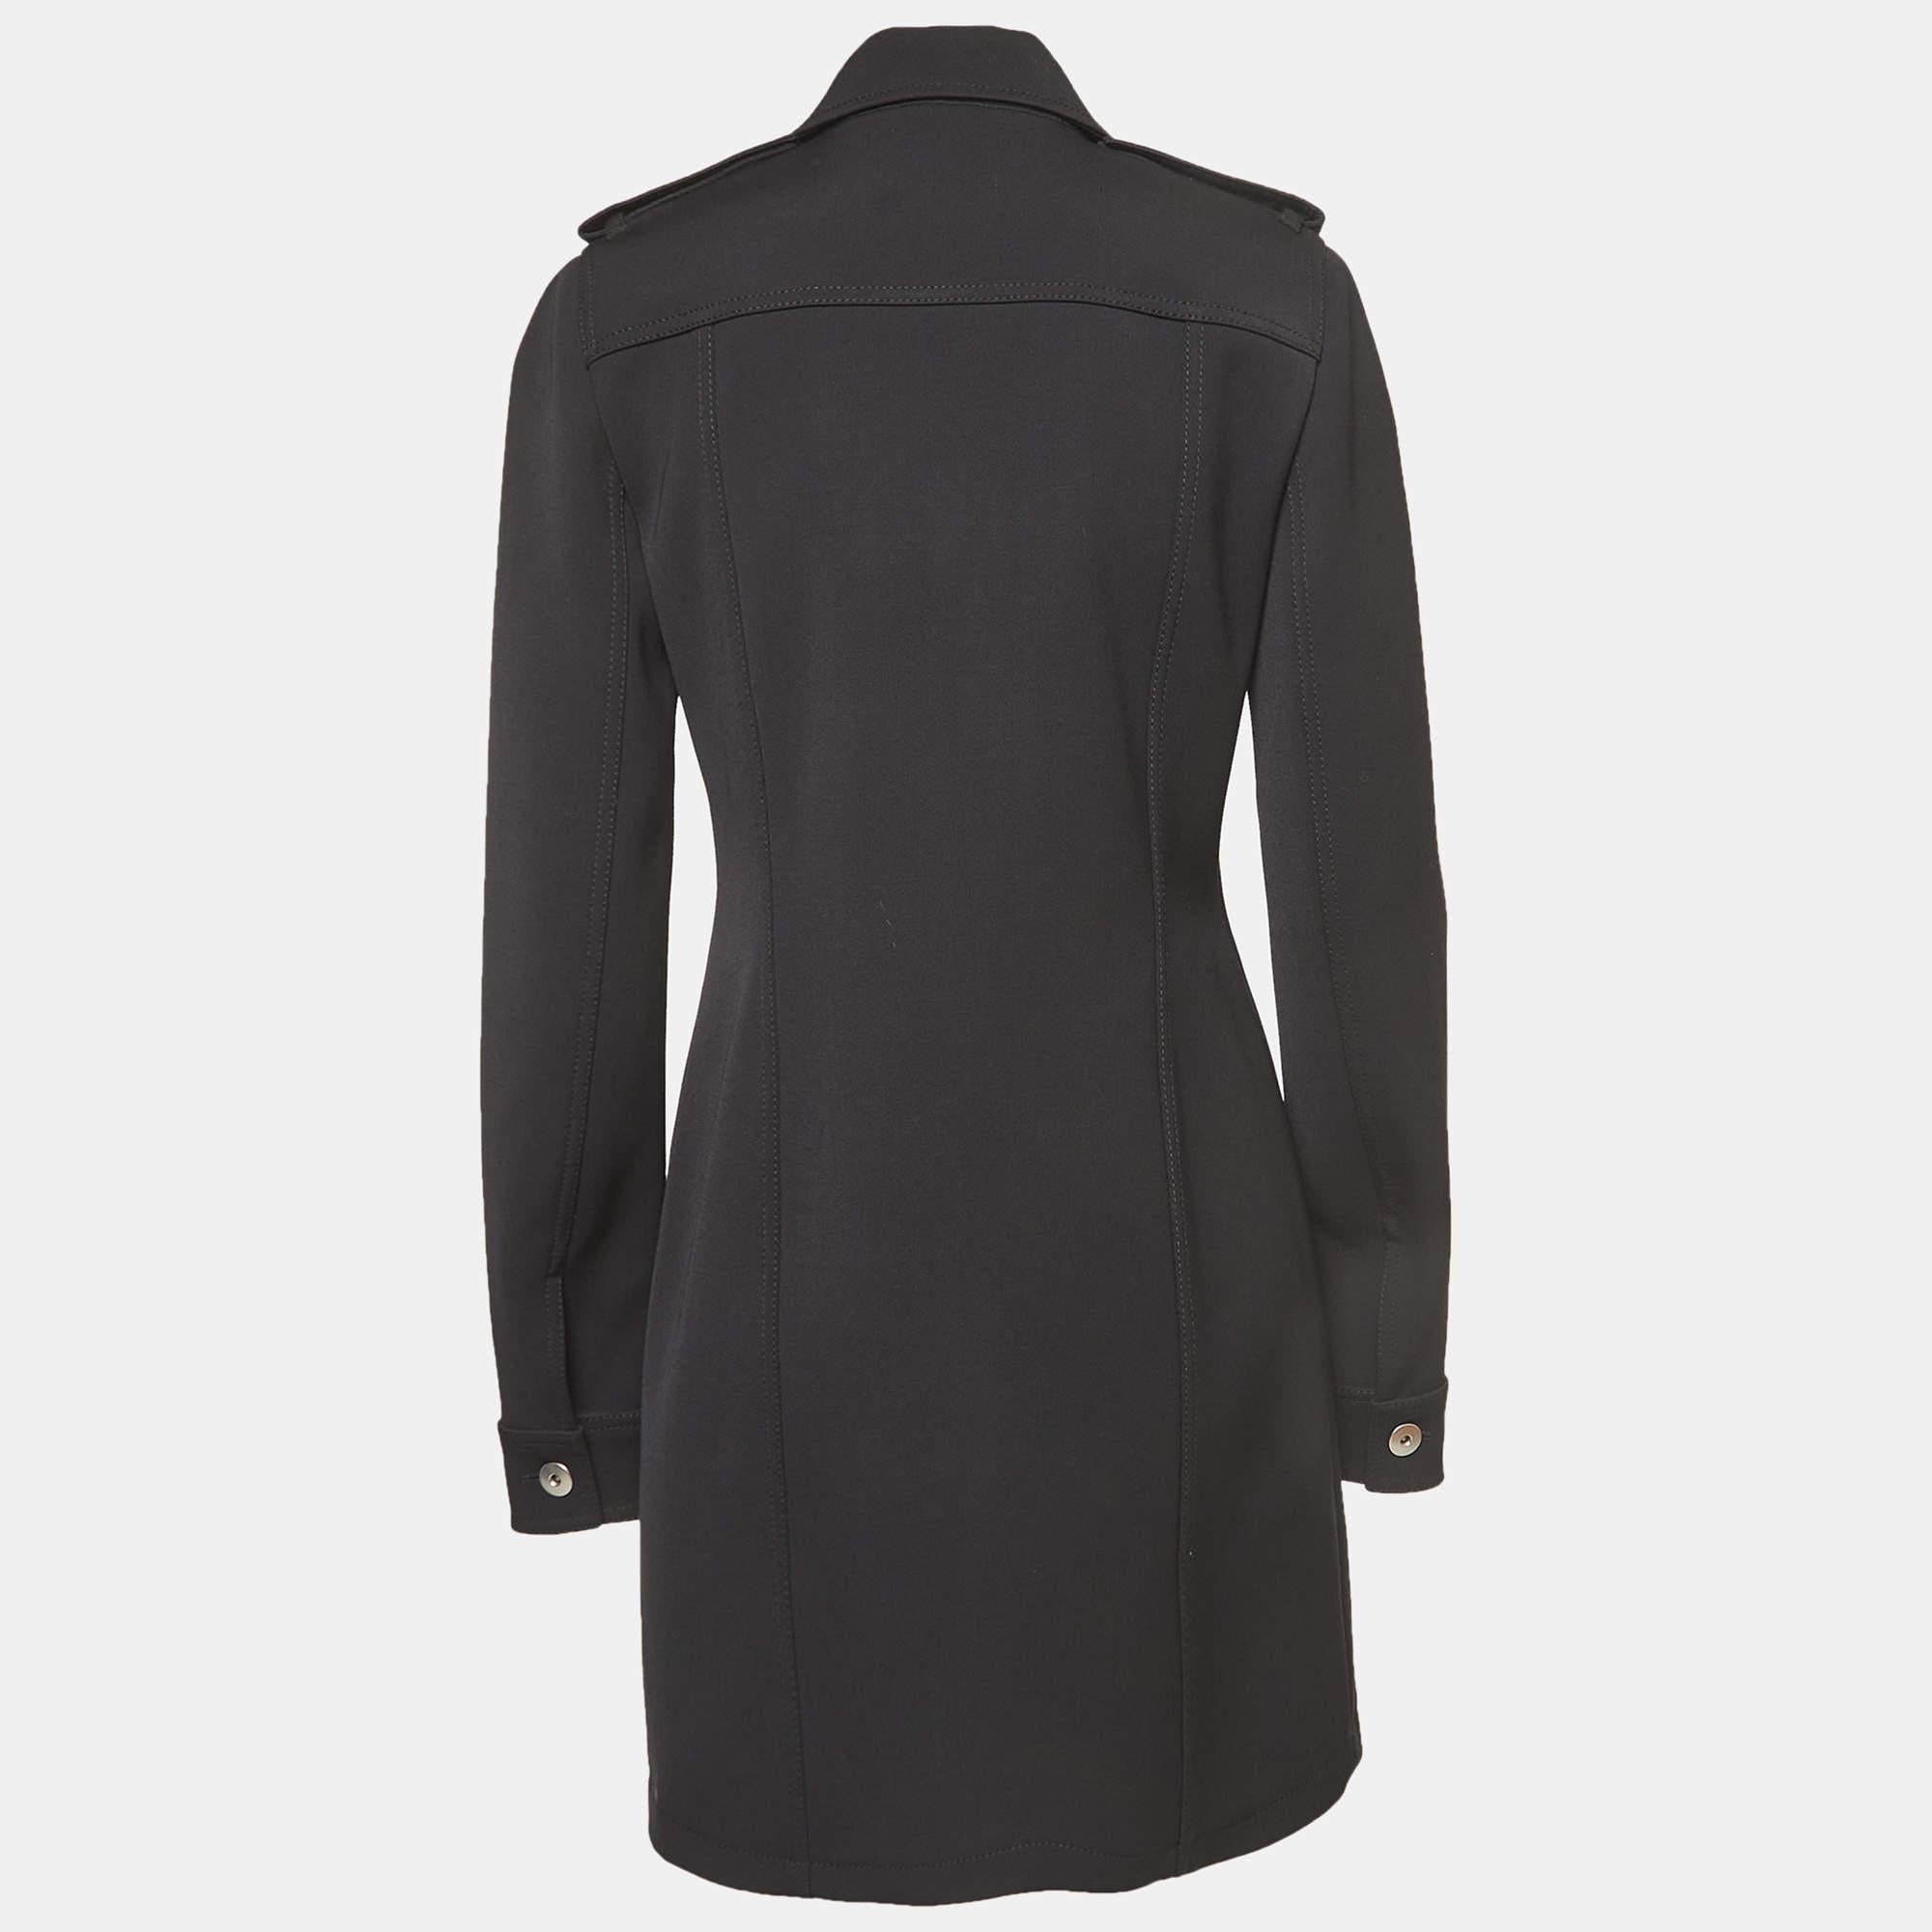 Experience the joy of expert tailoring with this Bottega Veneta dress for women. Meticulously made, it offers a flawless fit and luxe details, ensuring unmatched comfort. This beautiful creation will elevate your style effortlessly.

